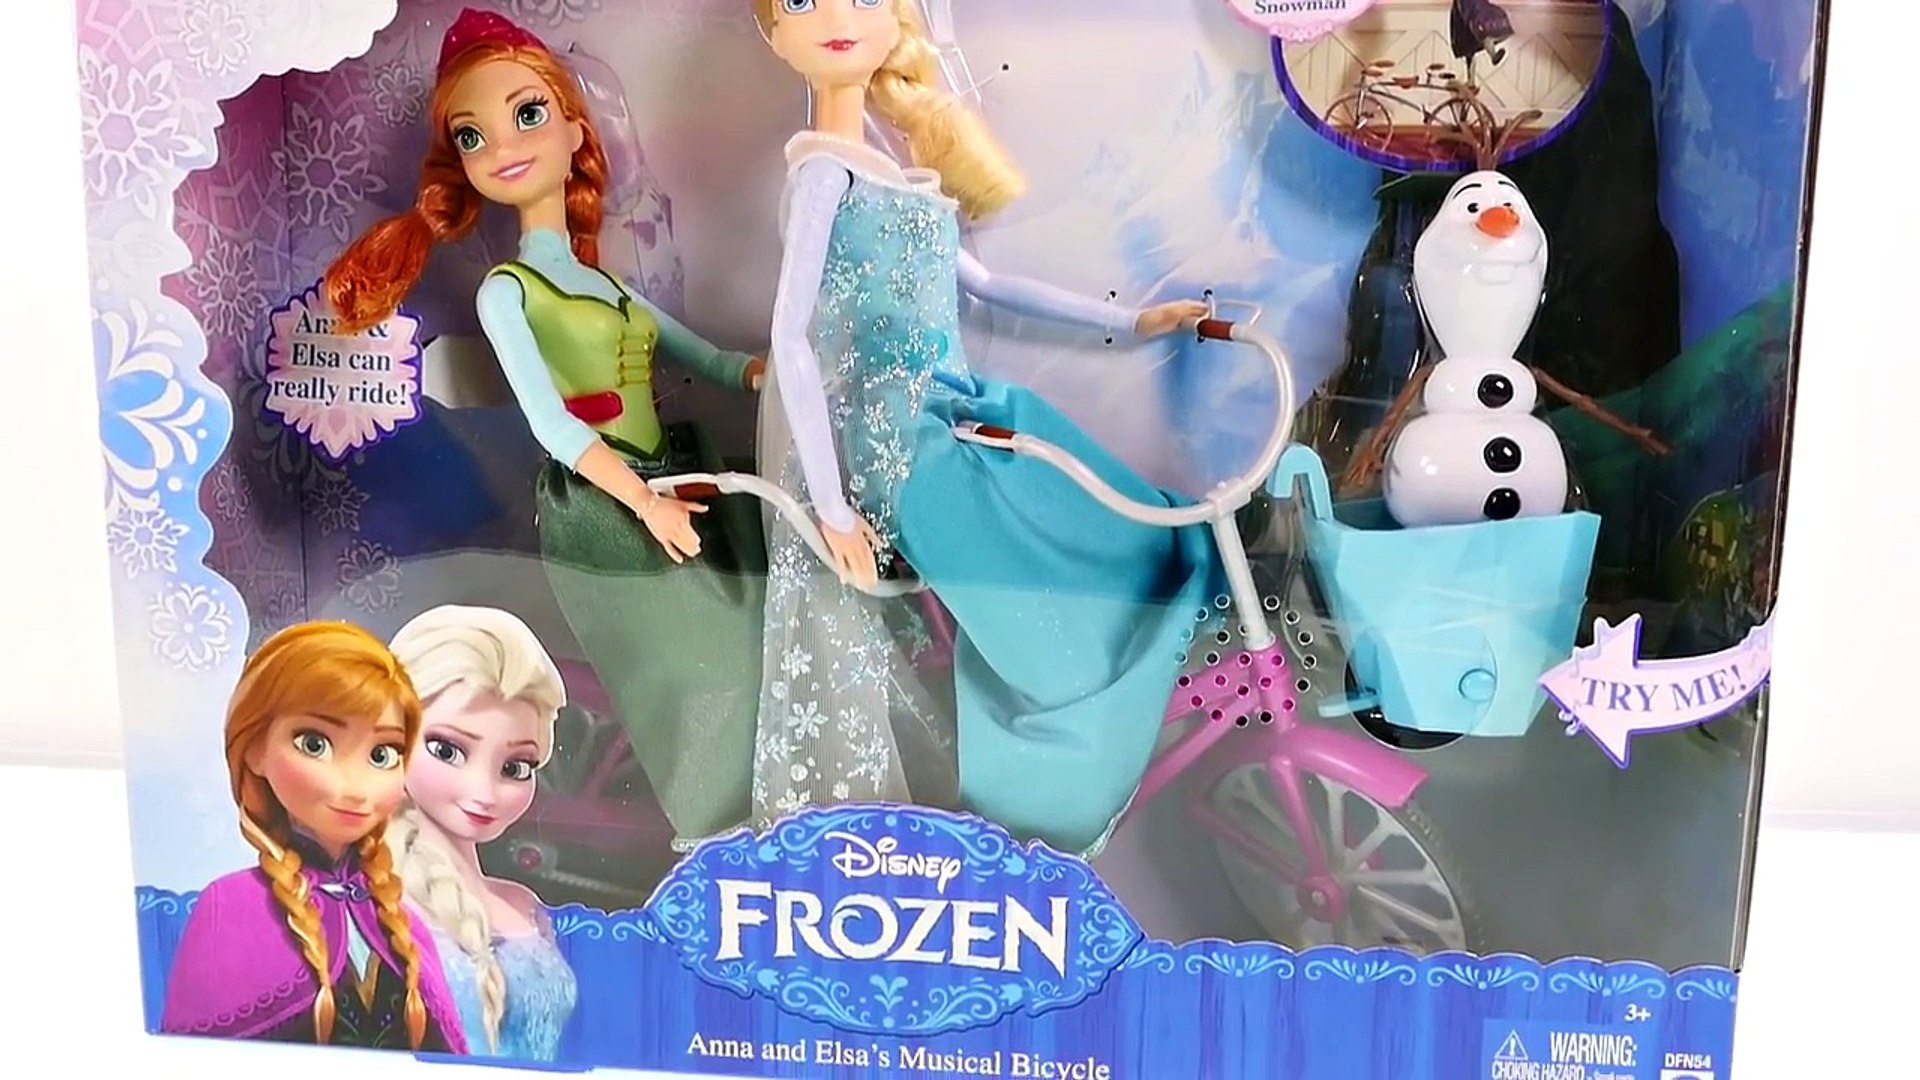 Frozen Anna and Elsa Musical Bicycle Disney Princess Barbie Dolls - Frozen  Songs - Dailymotion Video